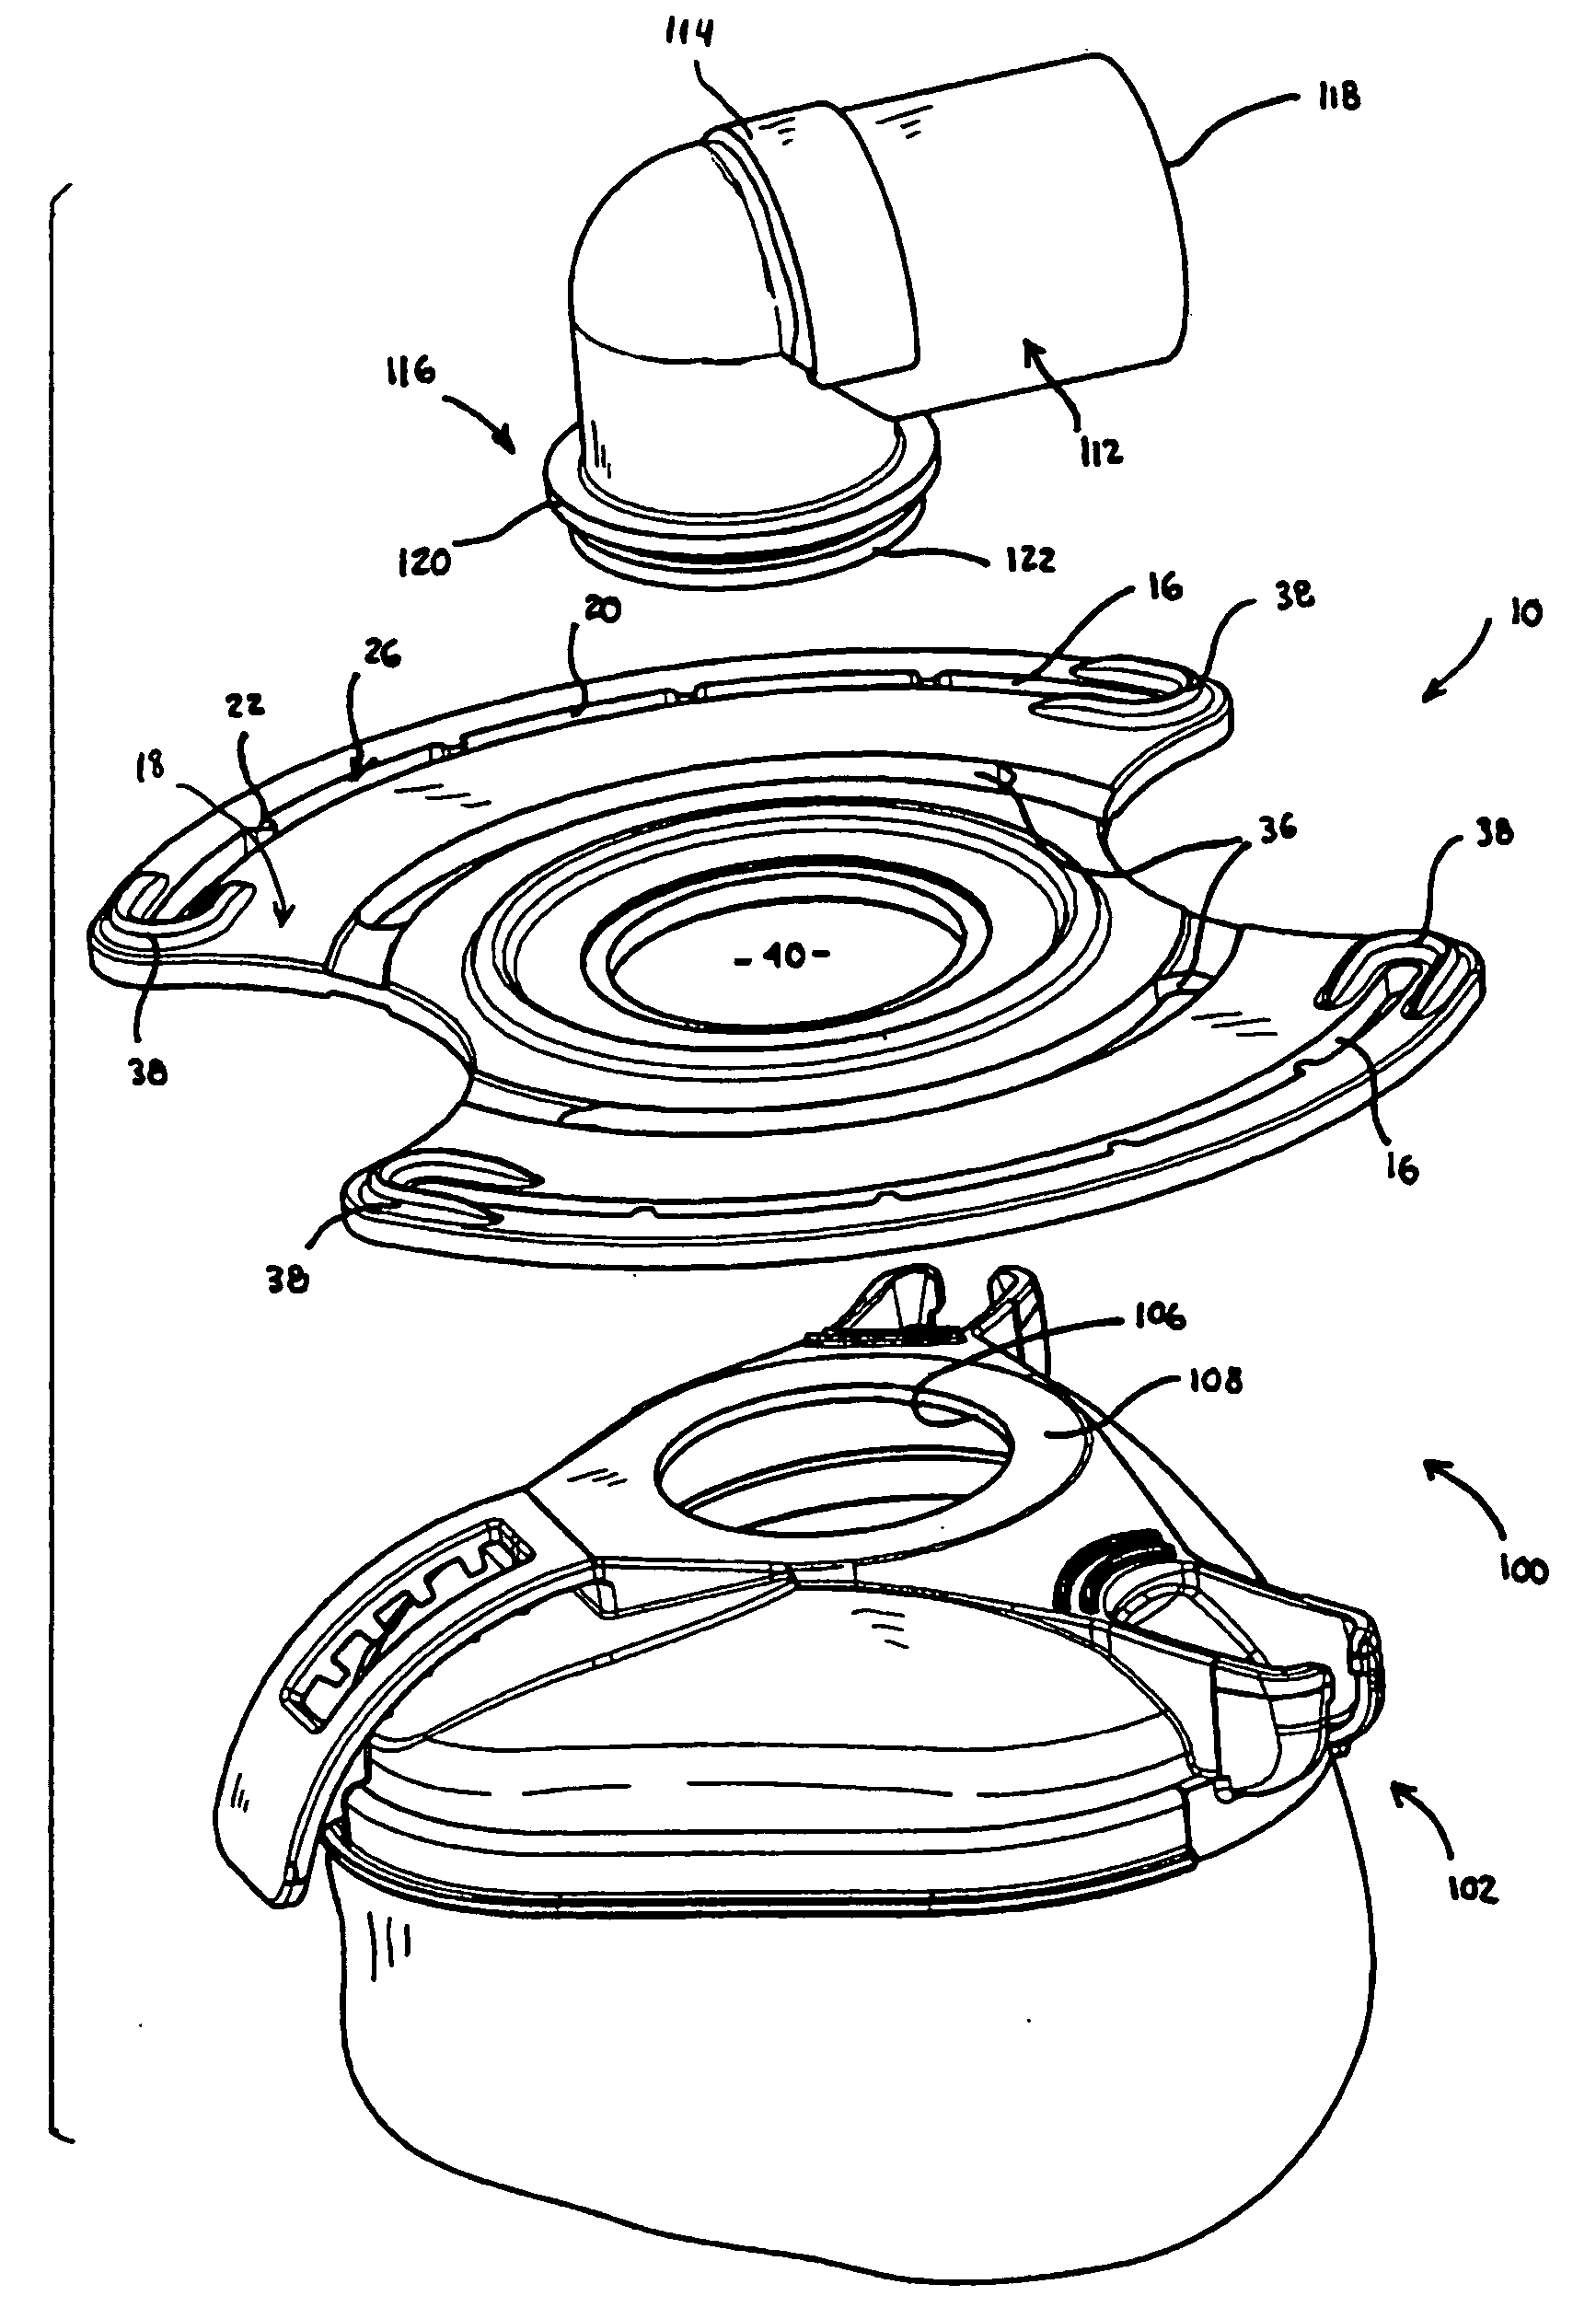 Patient interface device with universal headgear mounting member